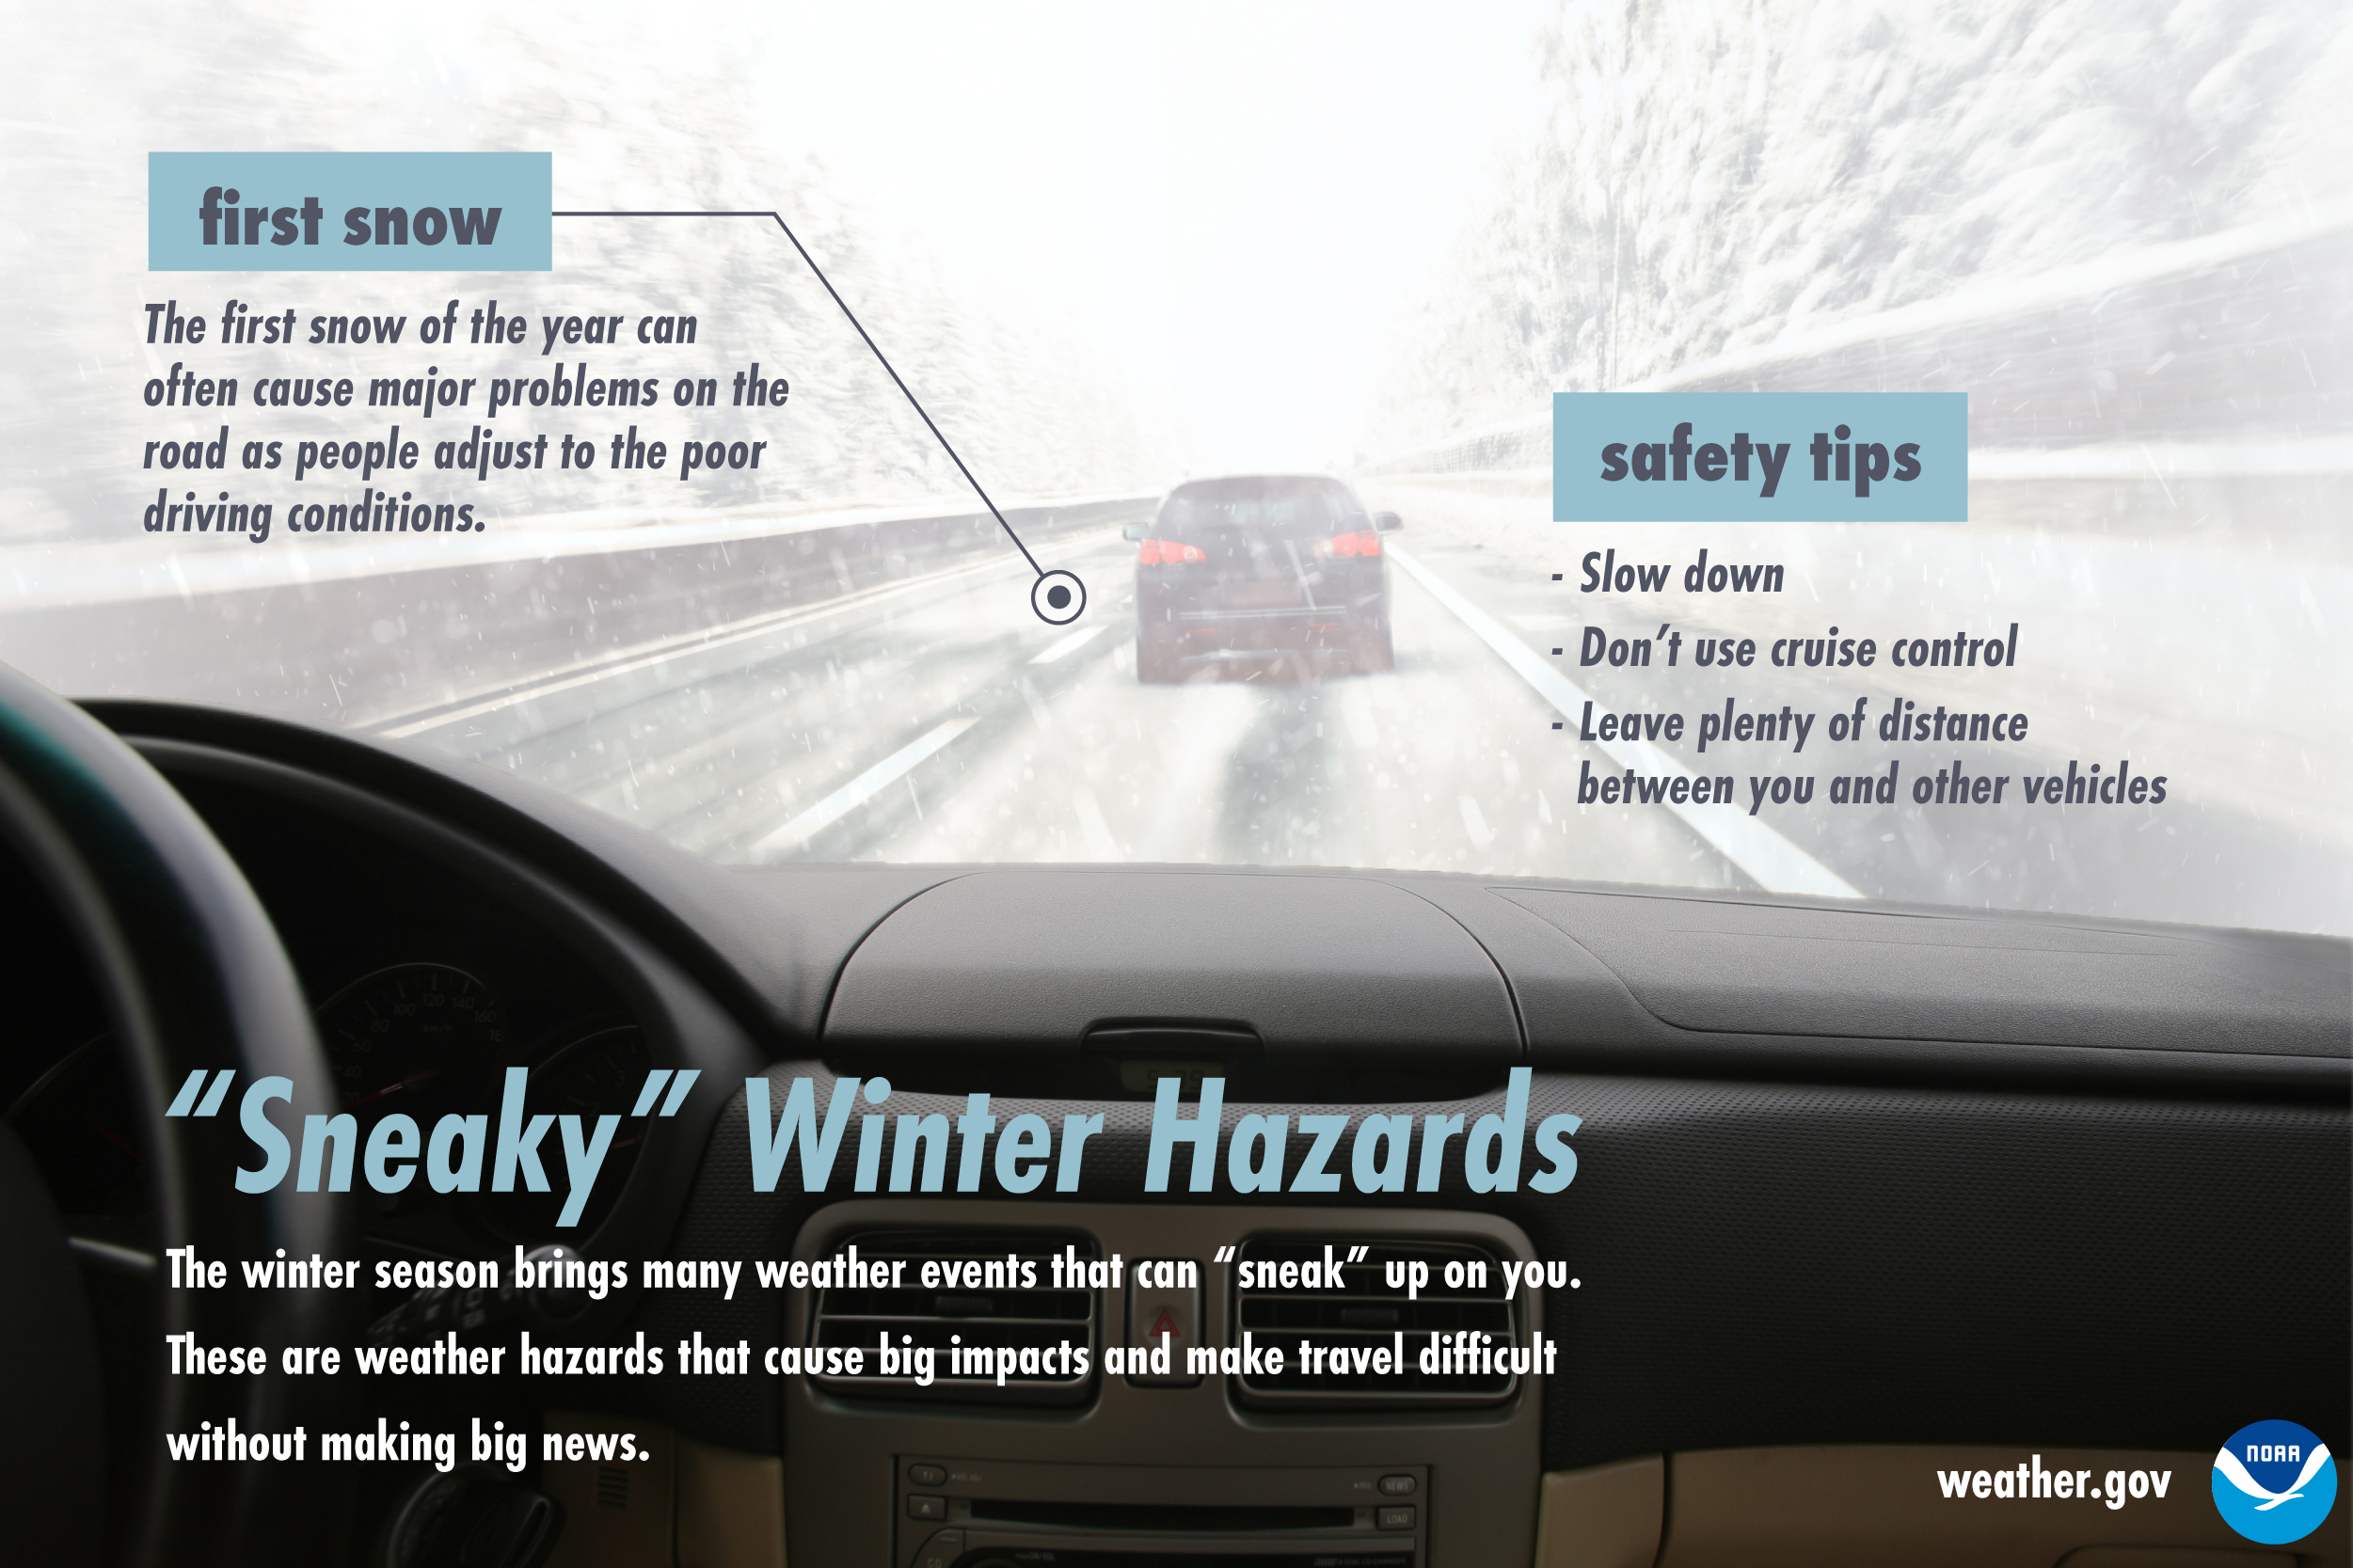 Sneaky Winter Hazards: First snow.